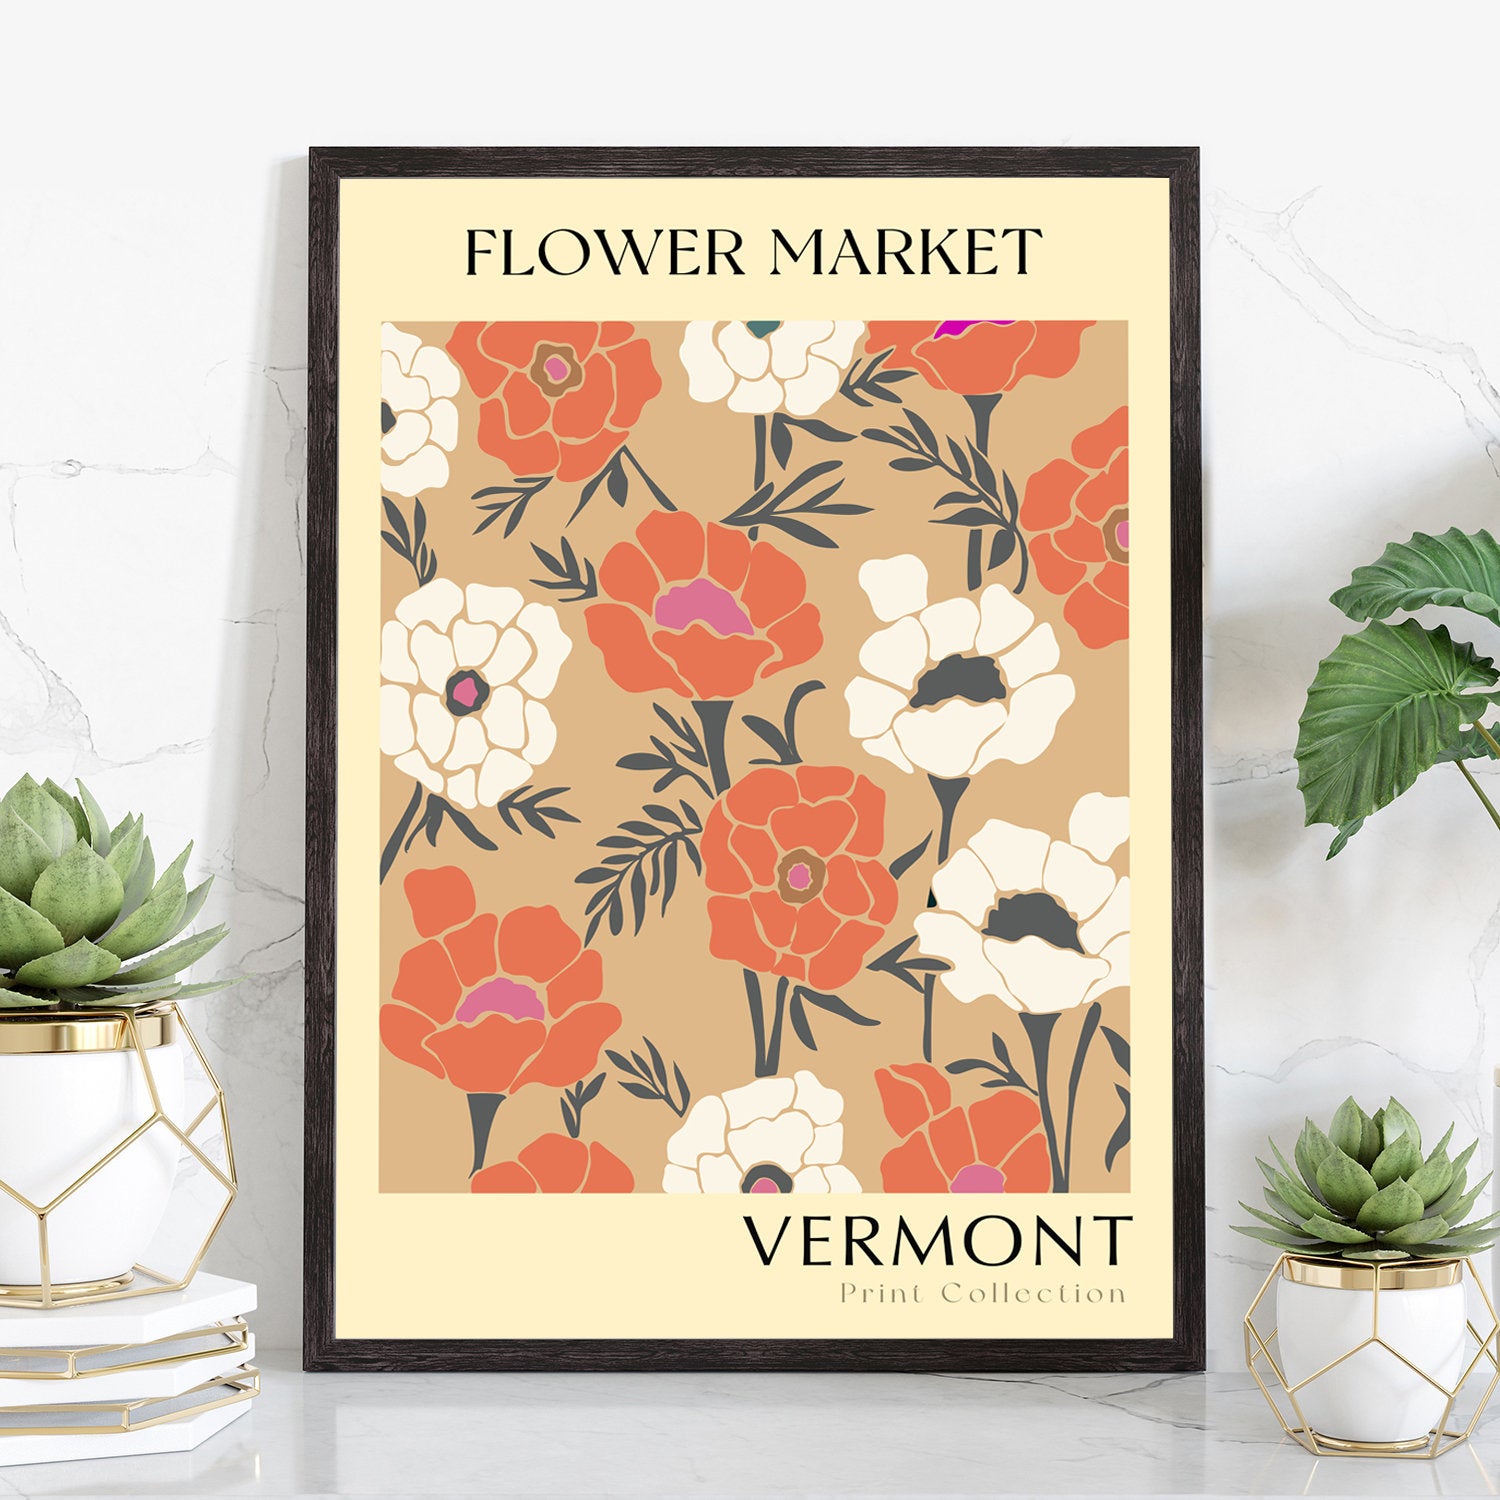 Vermont State flower print, USA states poster, Vermont flower market poster, Botanical poster, Nature poster artwork, Boho floral wall art